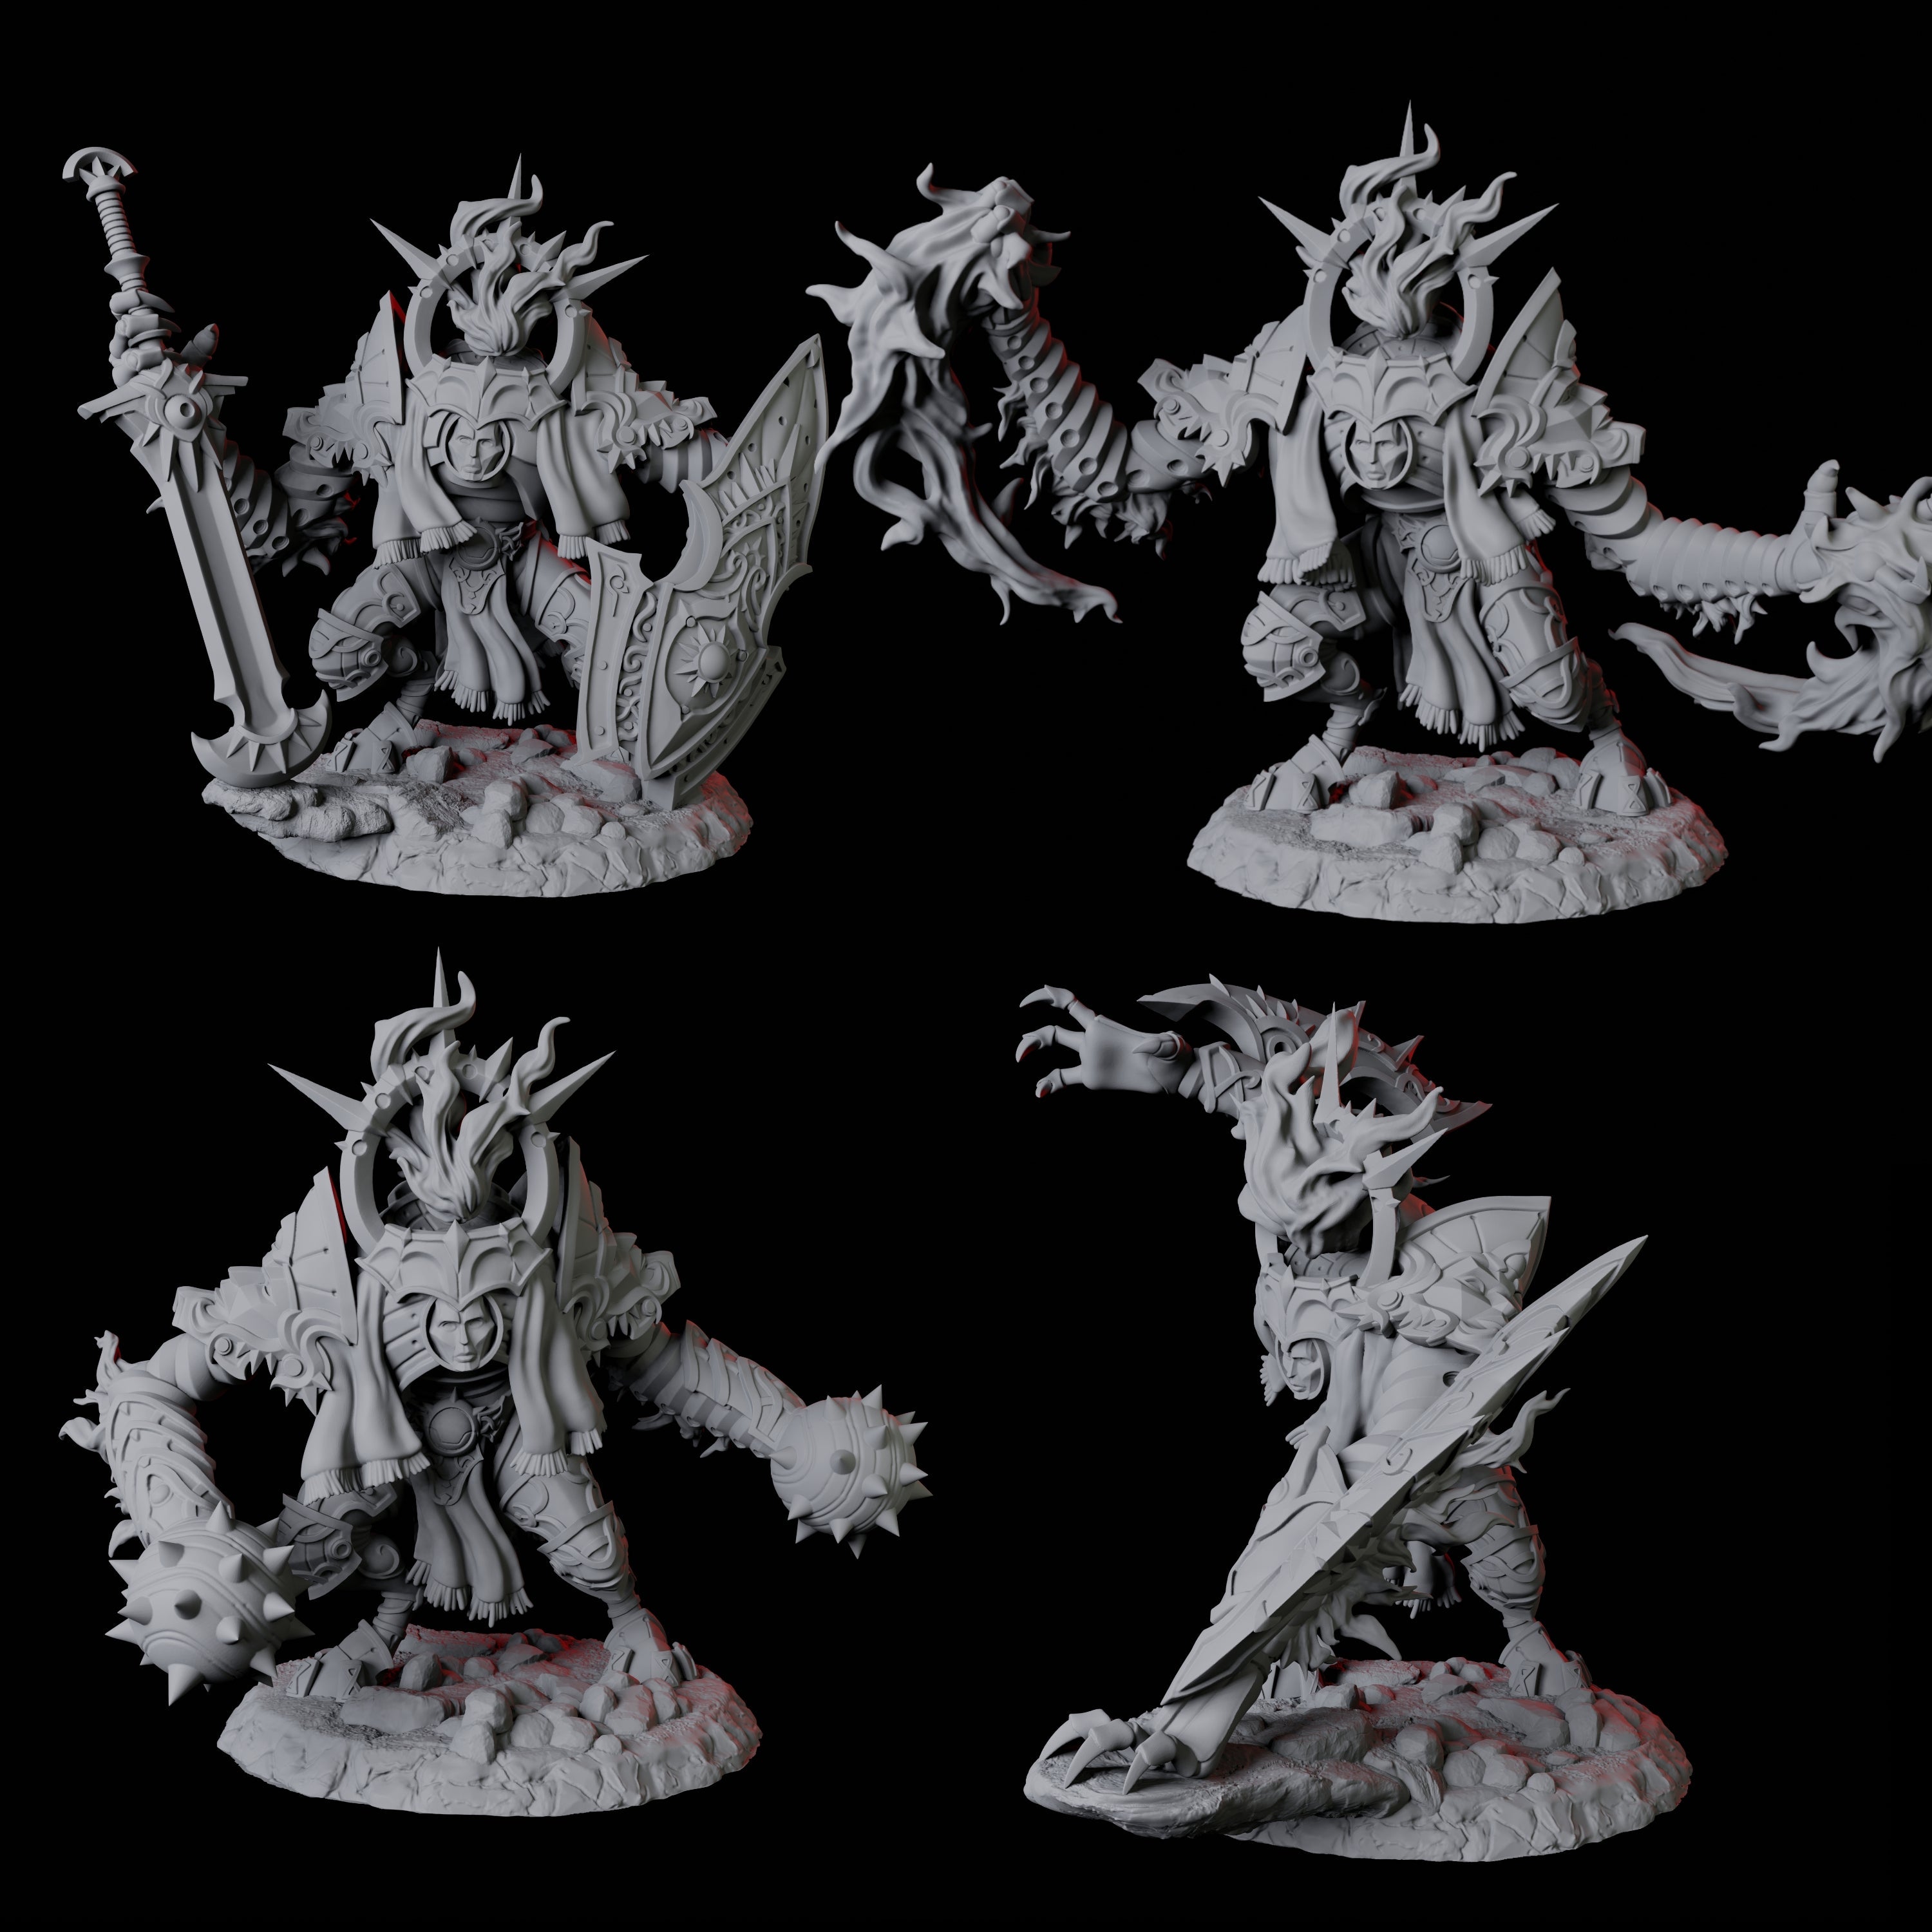 Four Surging Bastion Archons Miniature for Dungeons and Dragons, Pathfinder or other TTRPGs